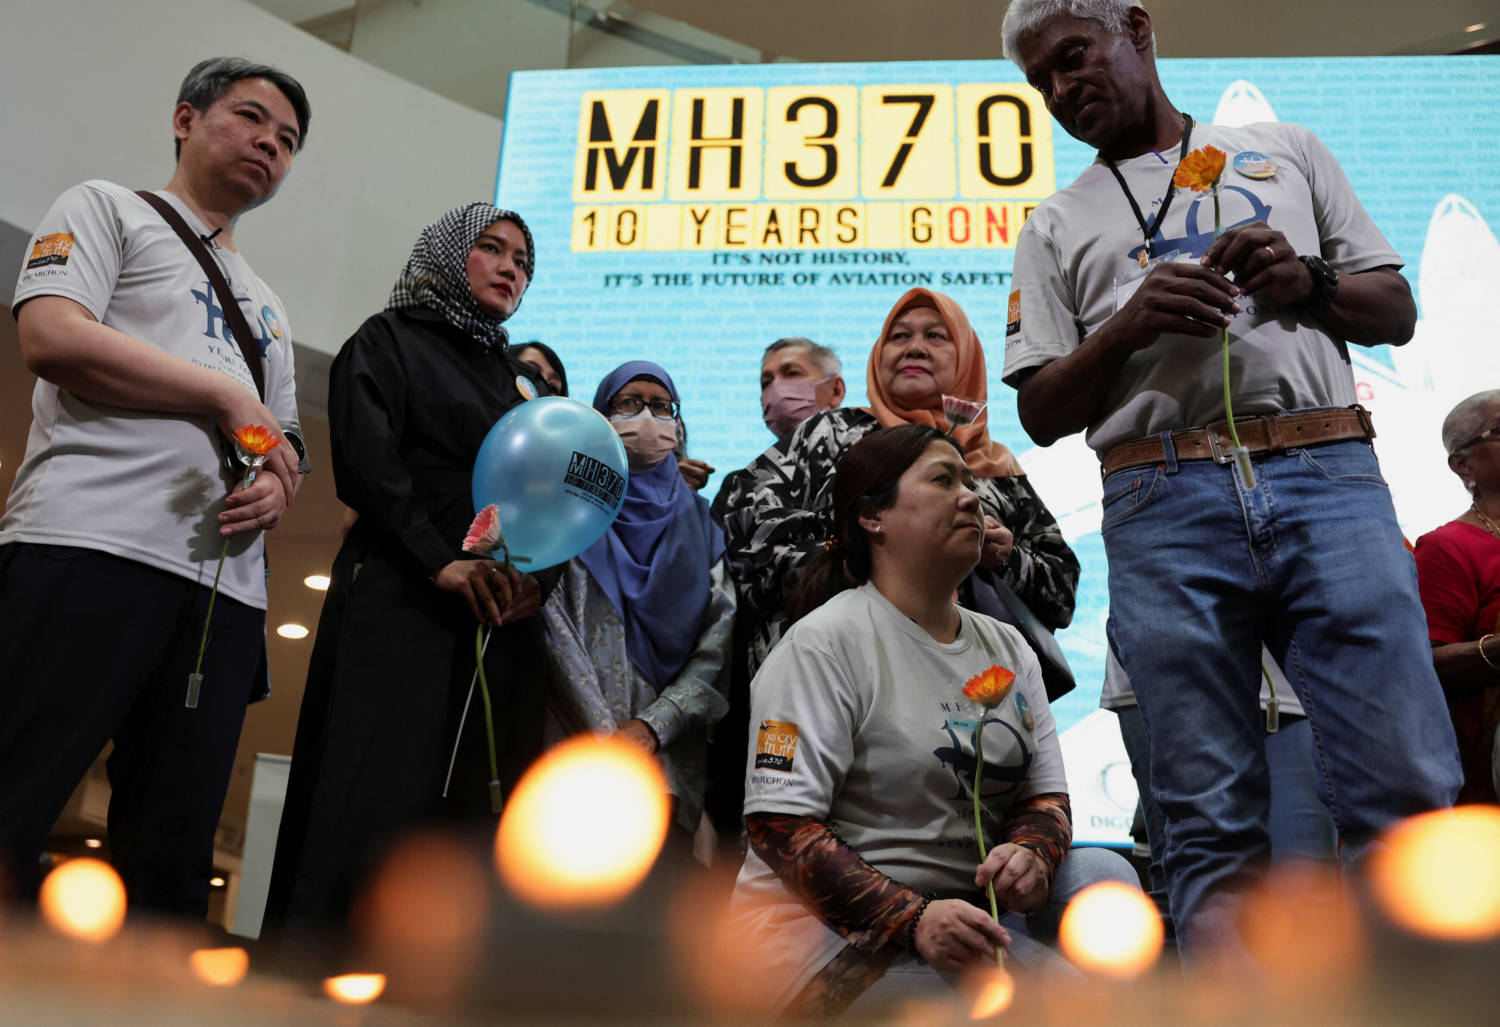 Families Of Those Aboard Missing Malaysia Airlines Flight Mh370 Hold Annual Remembrance Event